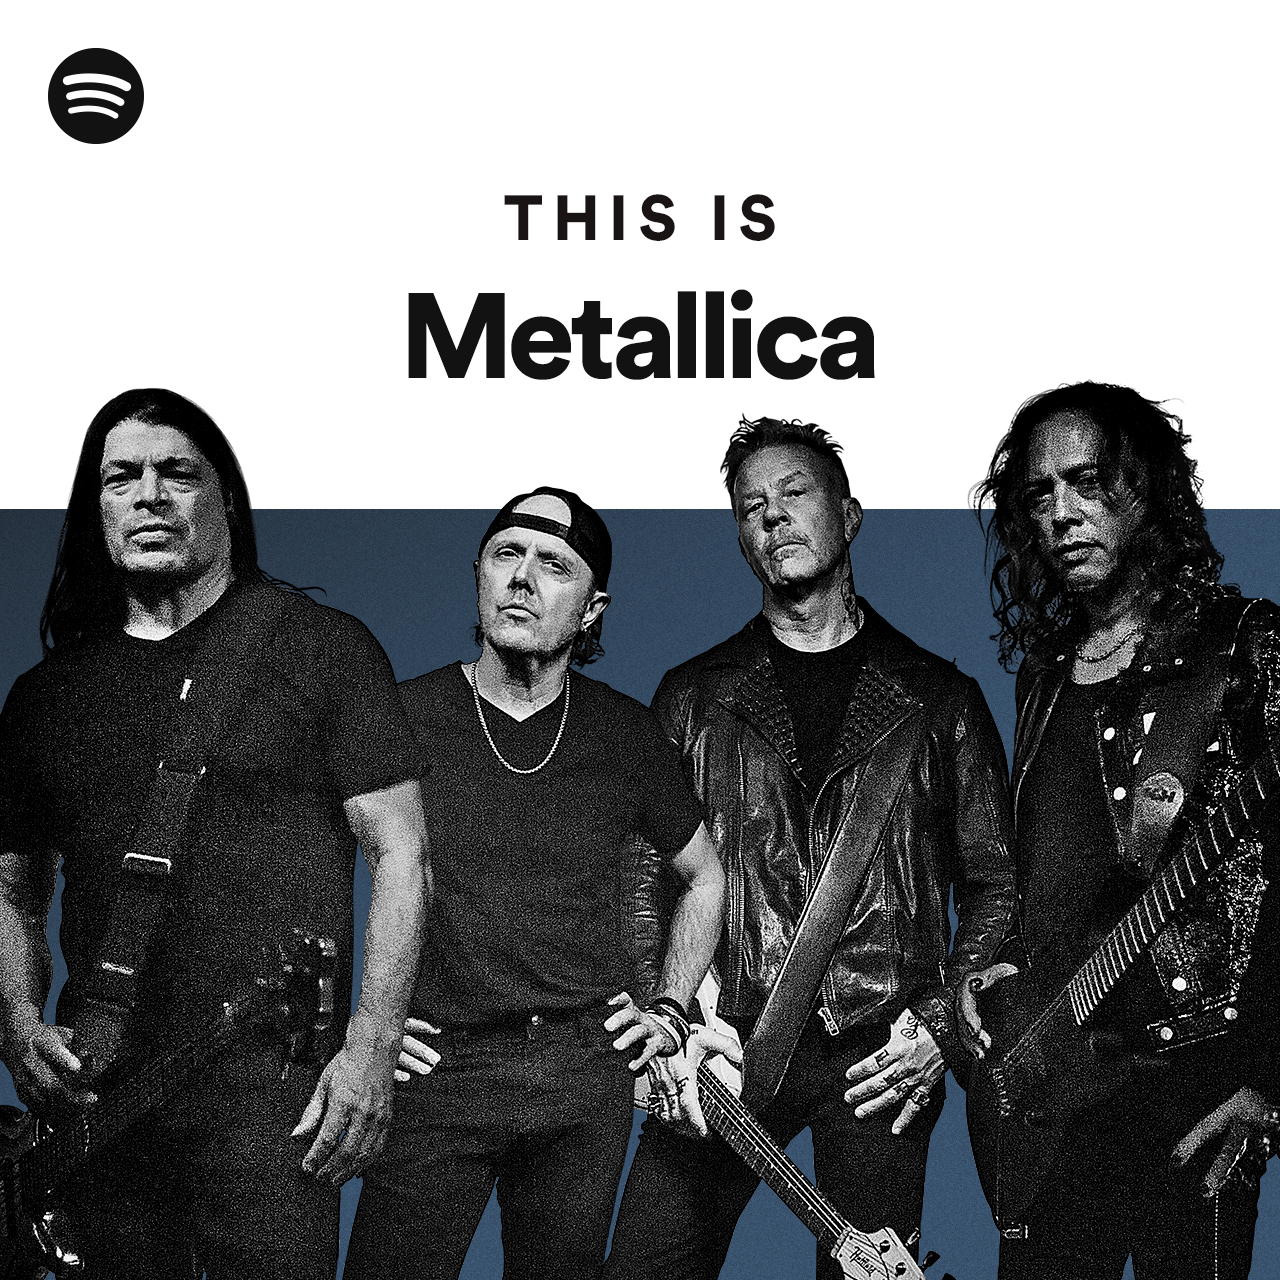 This Is Metallica